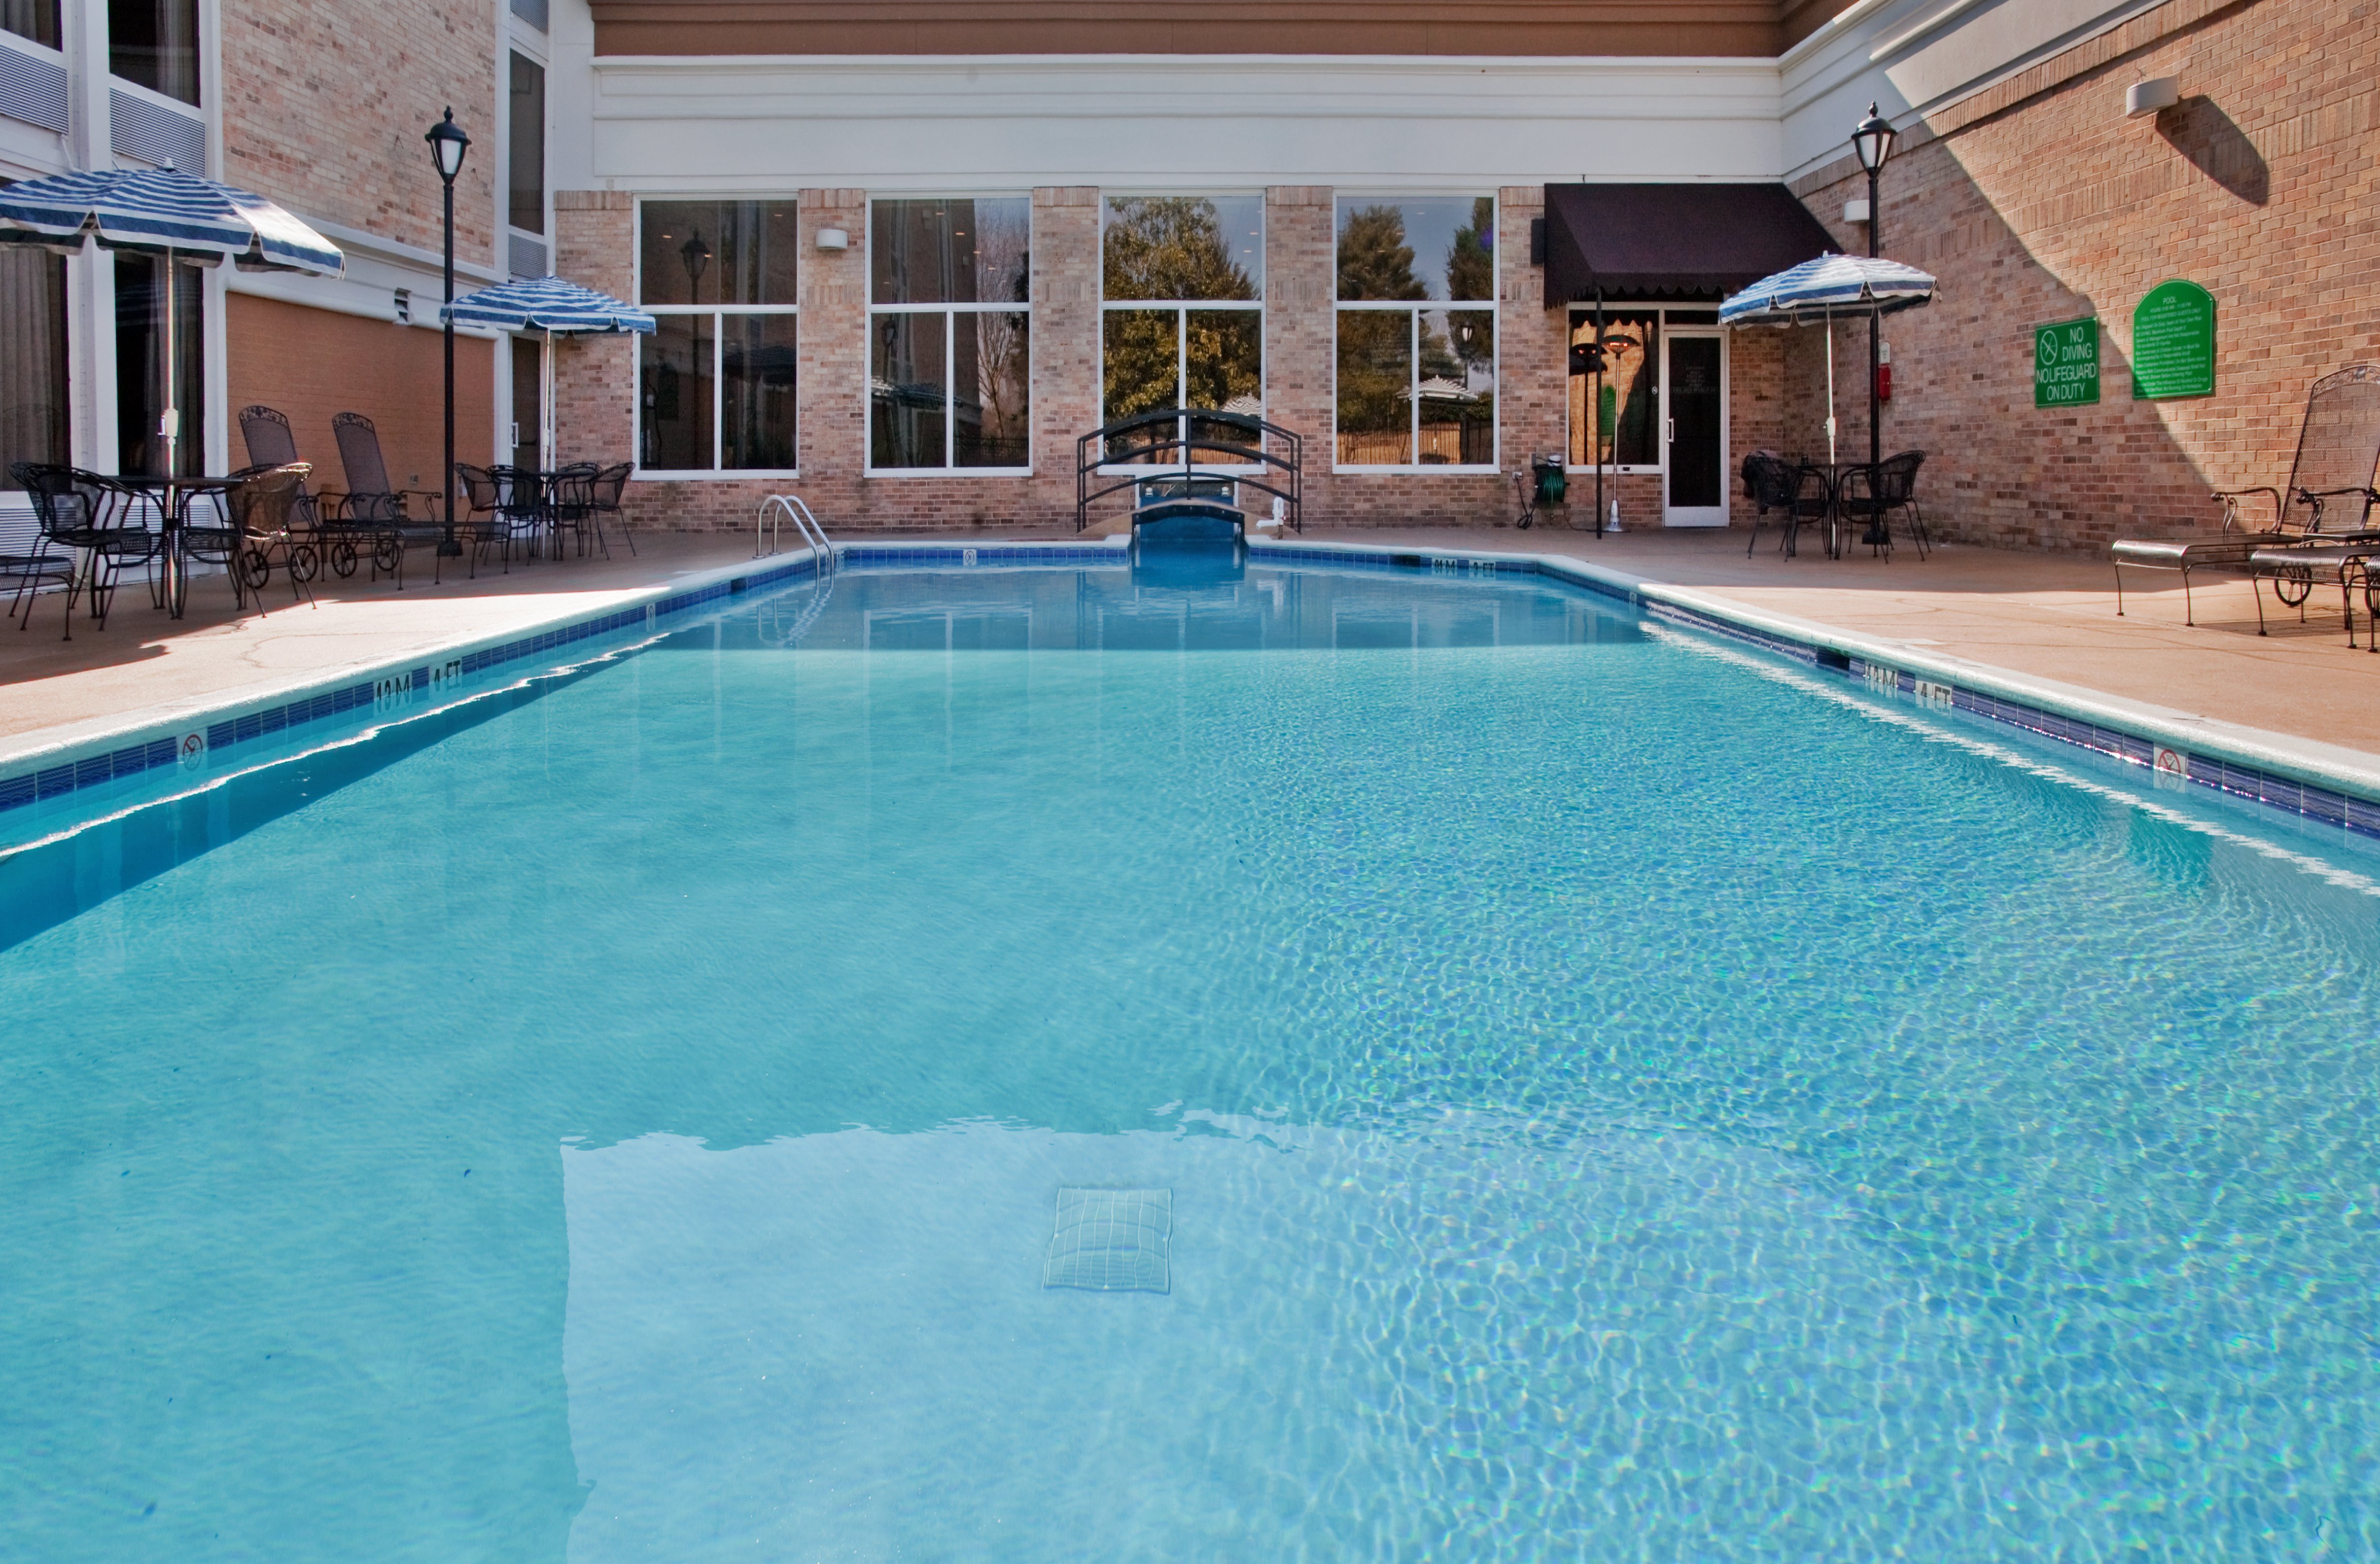 Have your ball team enjoy our pool after the game.